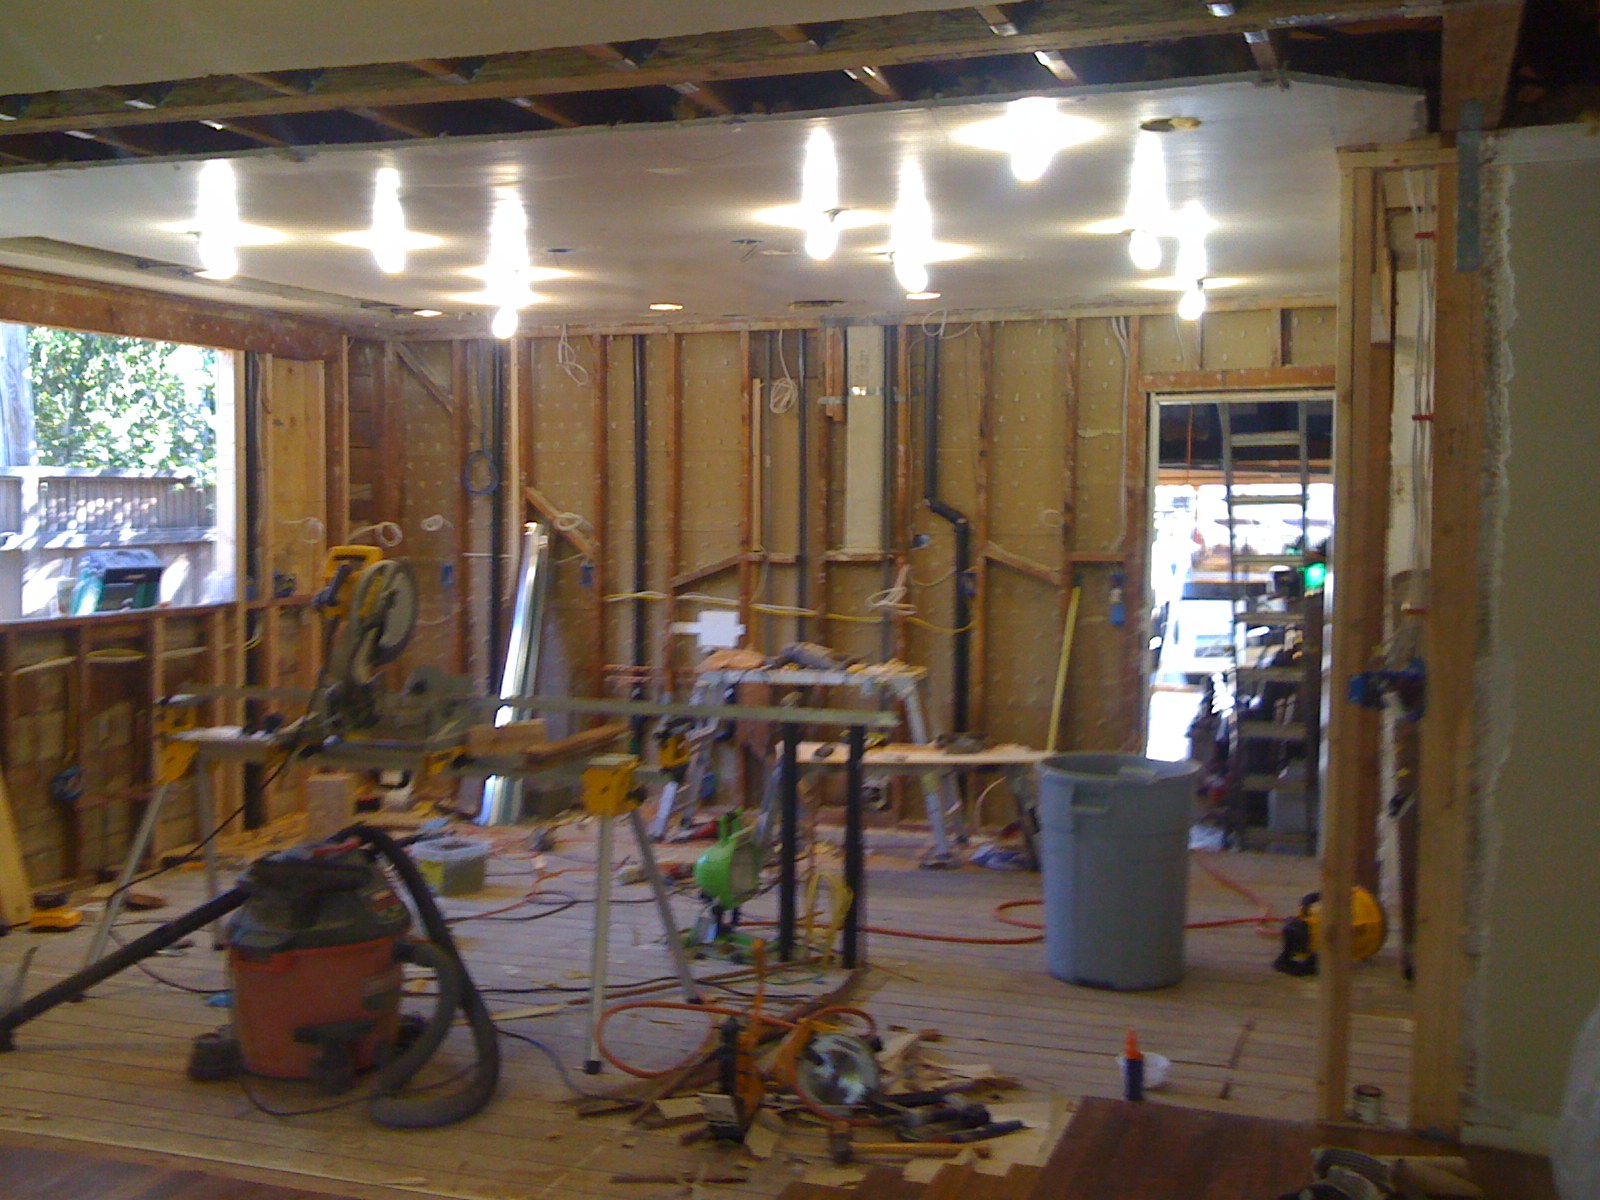 lighting installed as per title 24 energy code